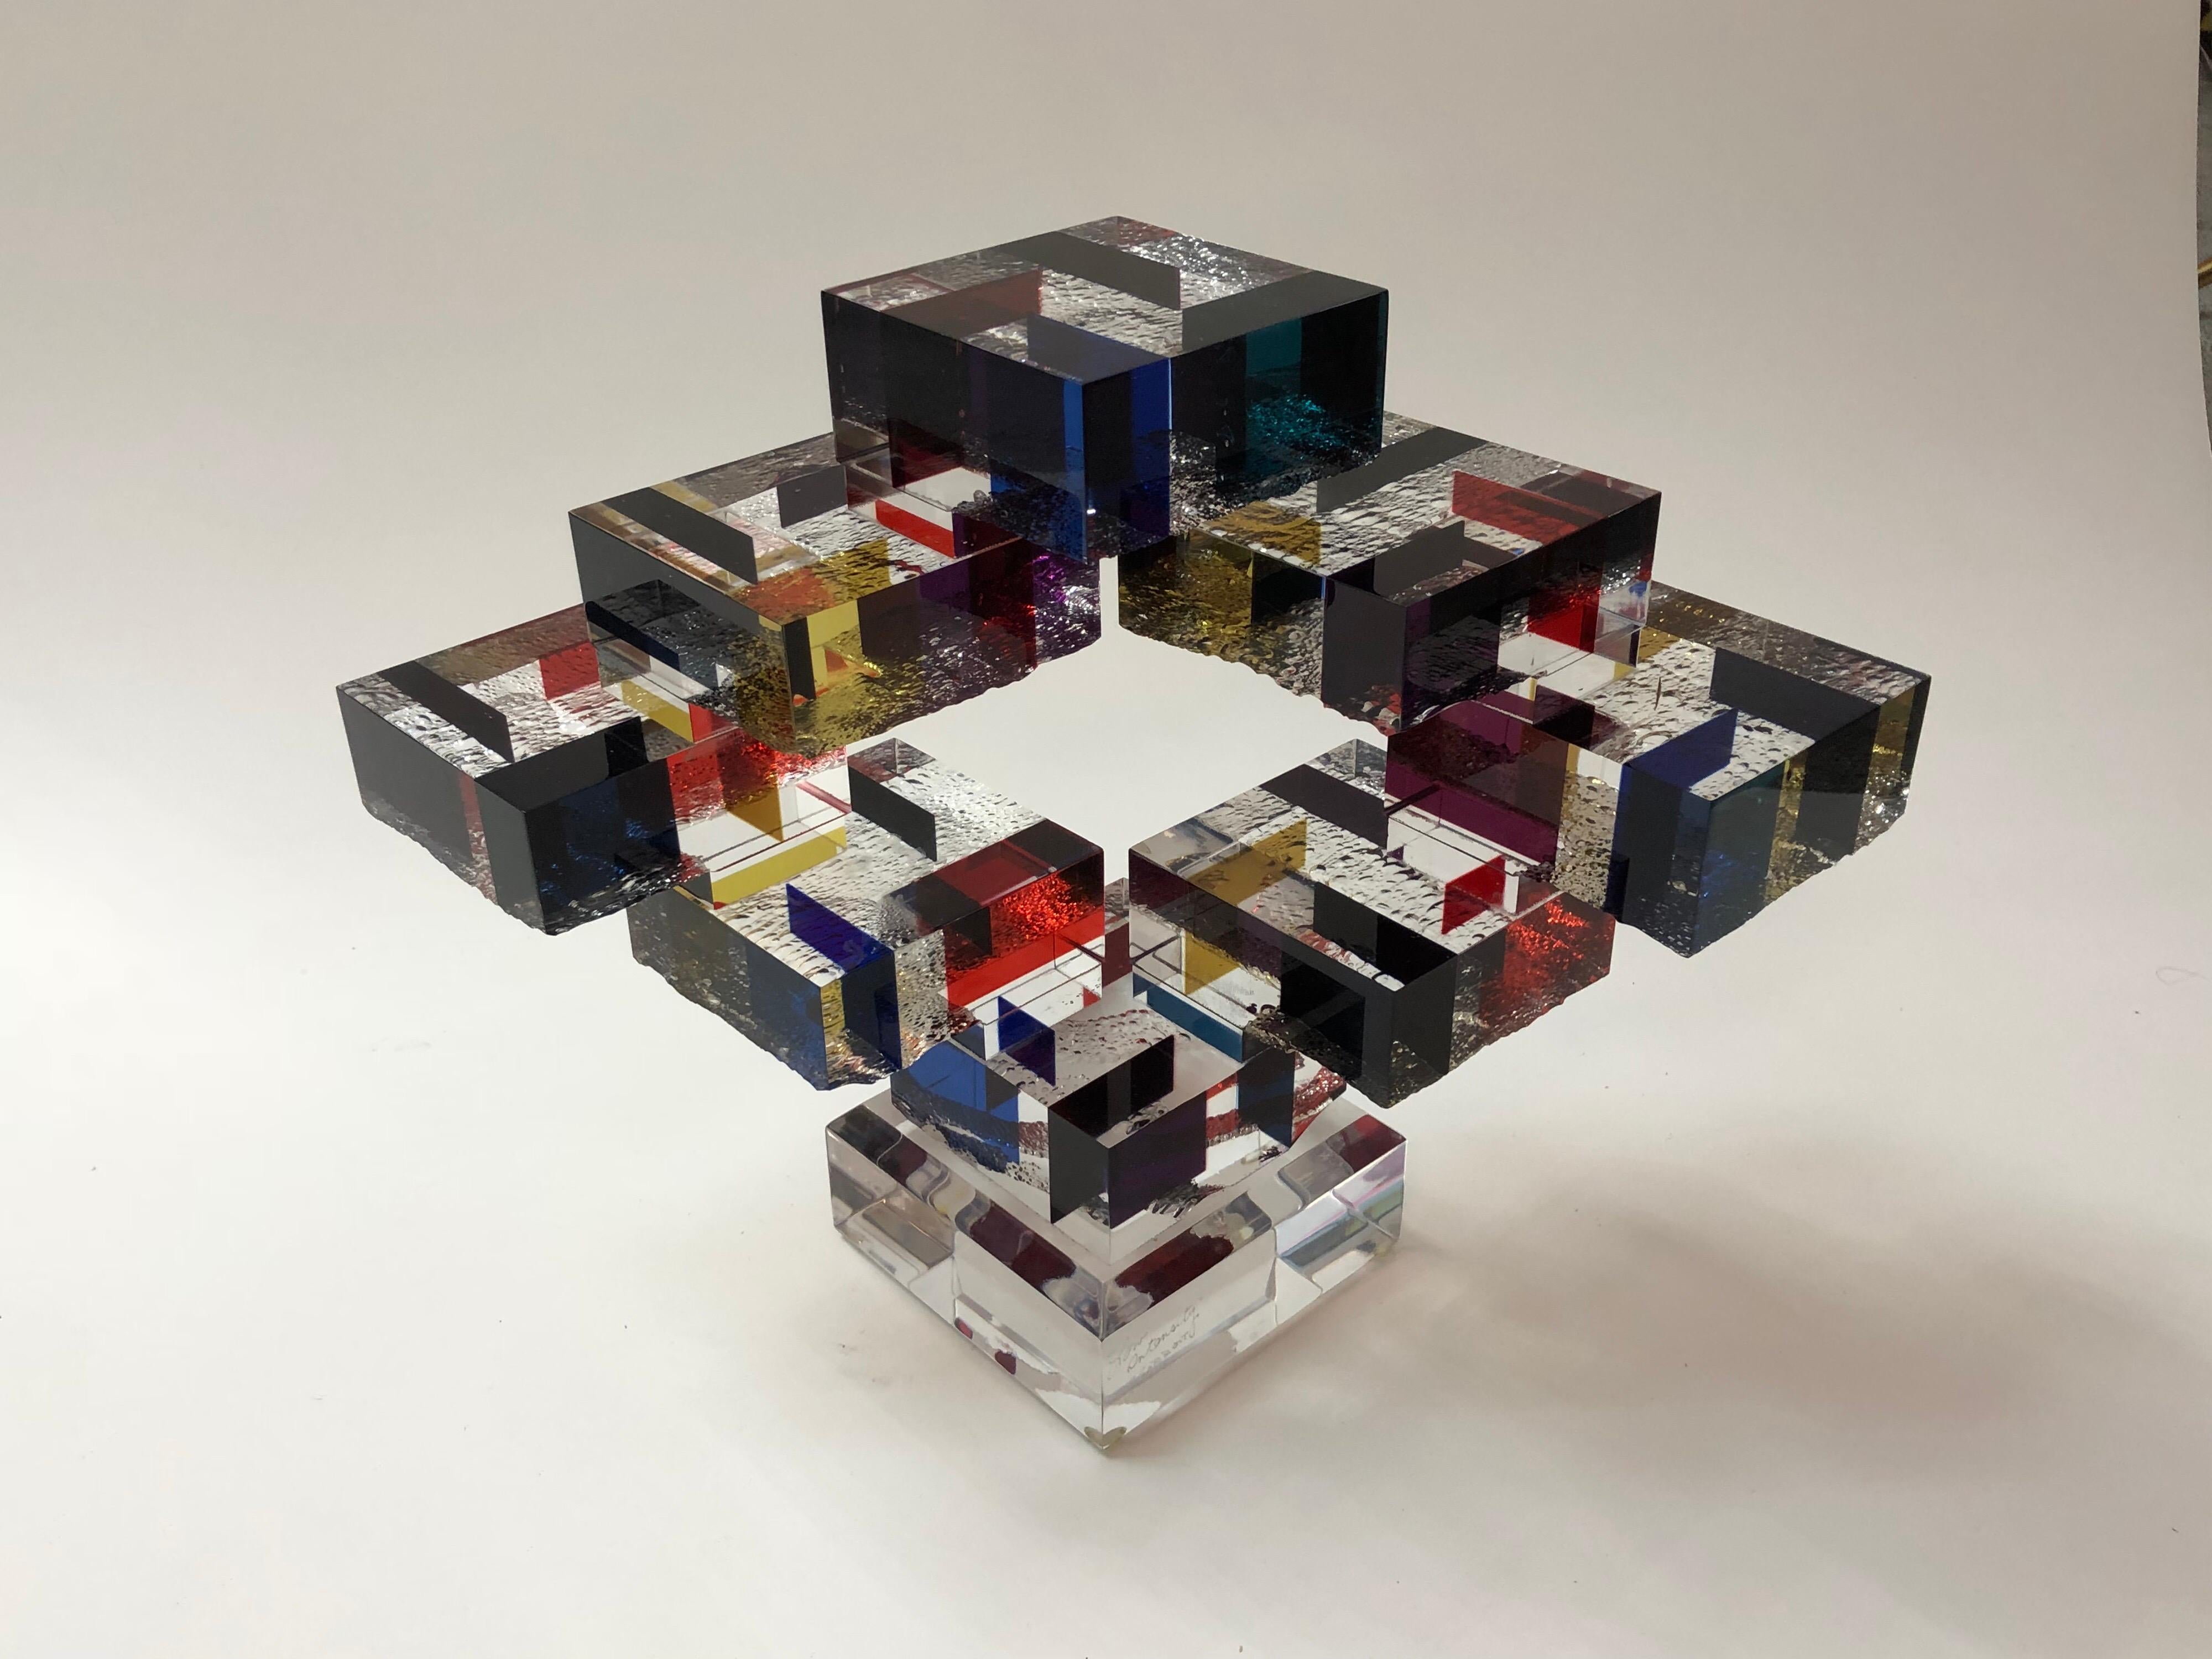 This is a very interesting and well crafted table sculpture. The Lucite cubes have multiple colors and texture on one side, they are arranged in an outward and upward design. Signed and dated. Name of sculpture is 